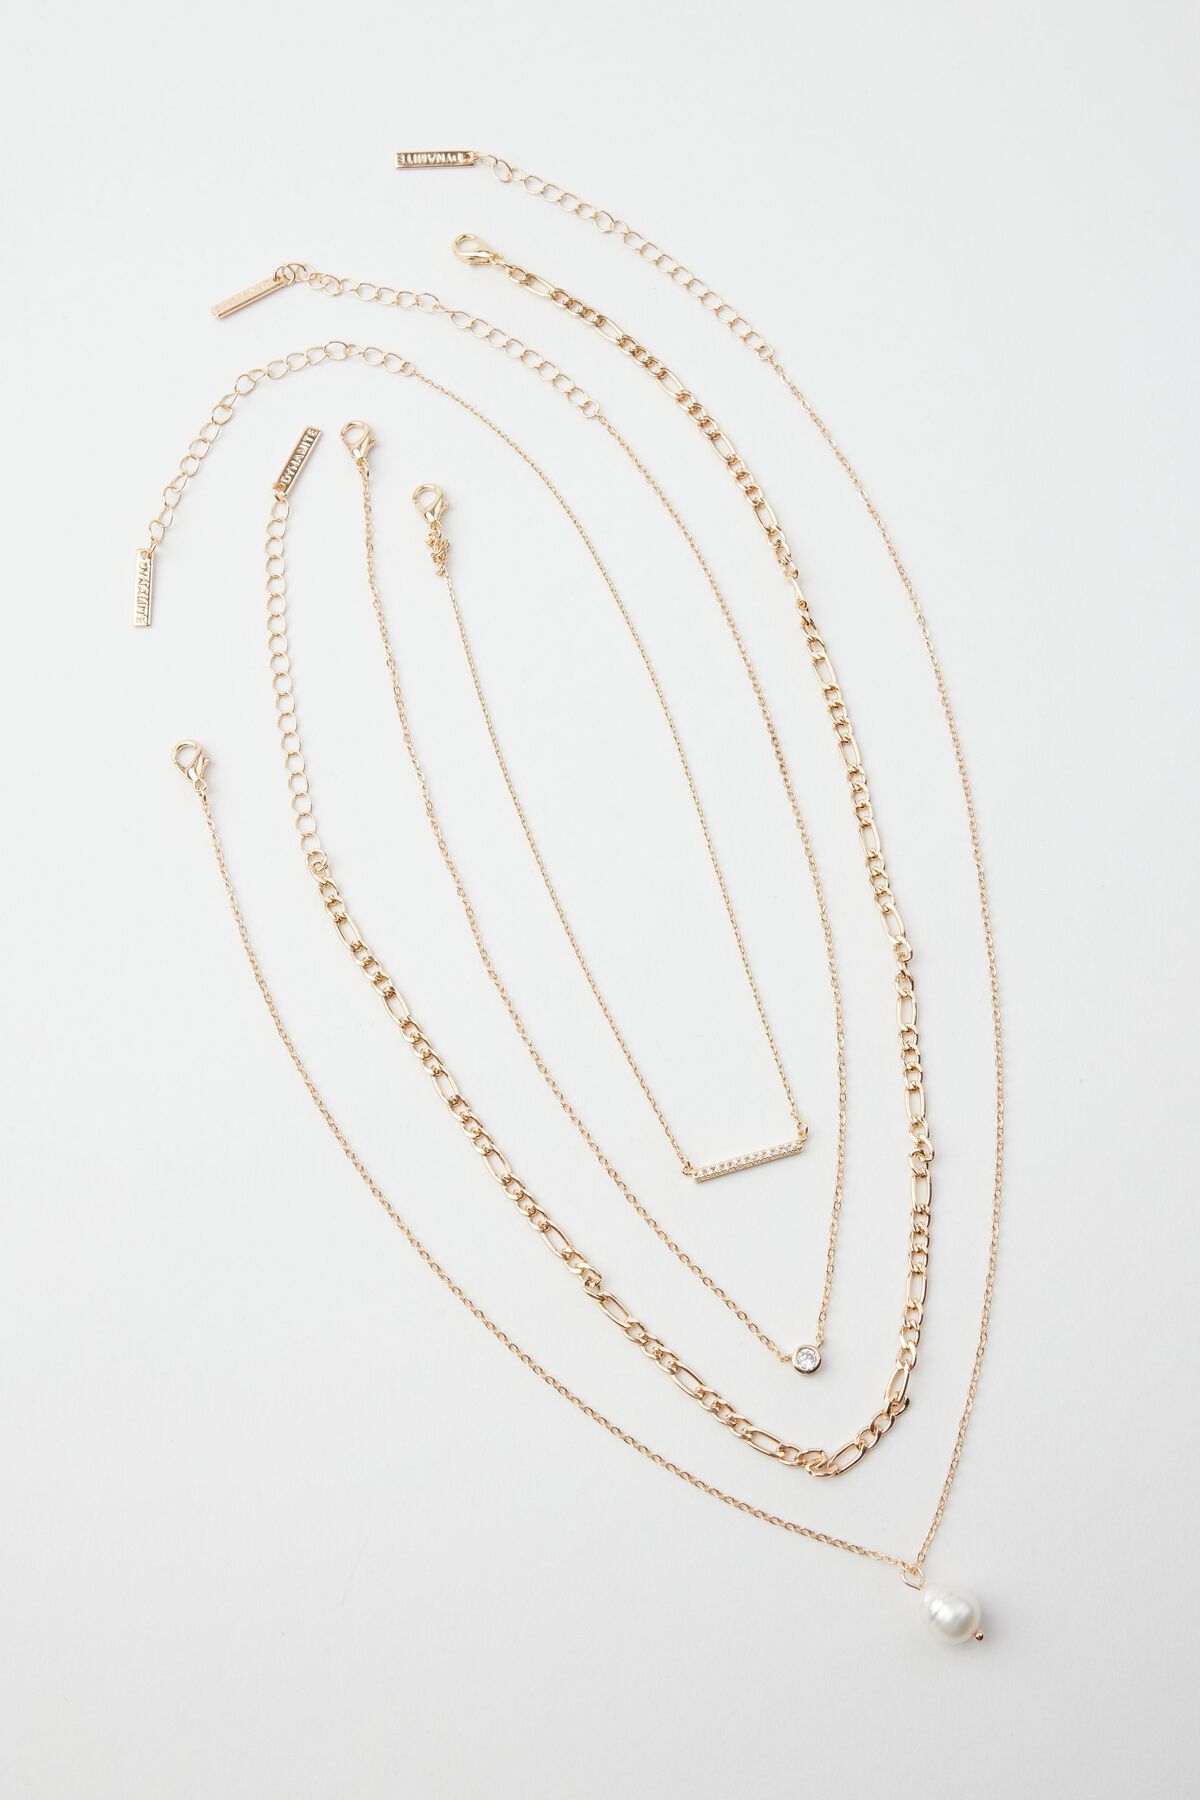 Dynamite Layered Gem & Pearl Chain Necklace. 2